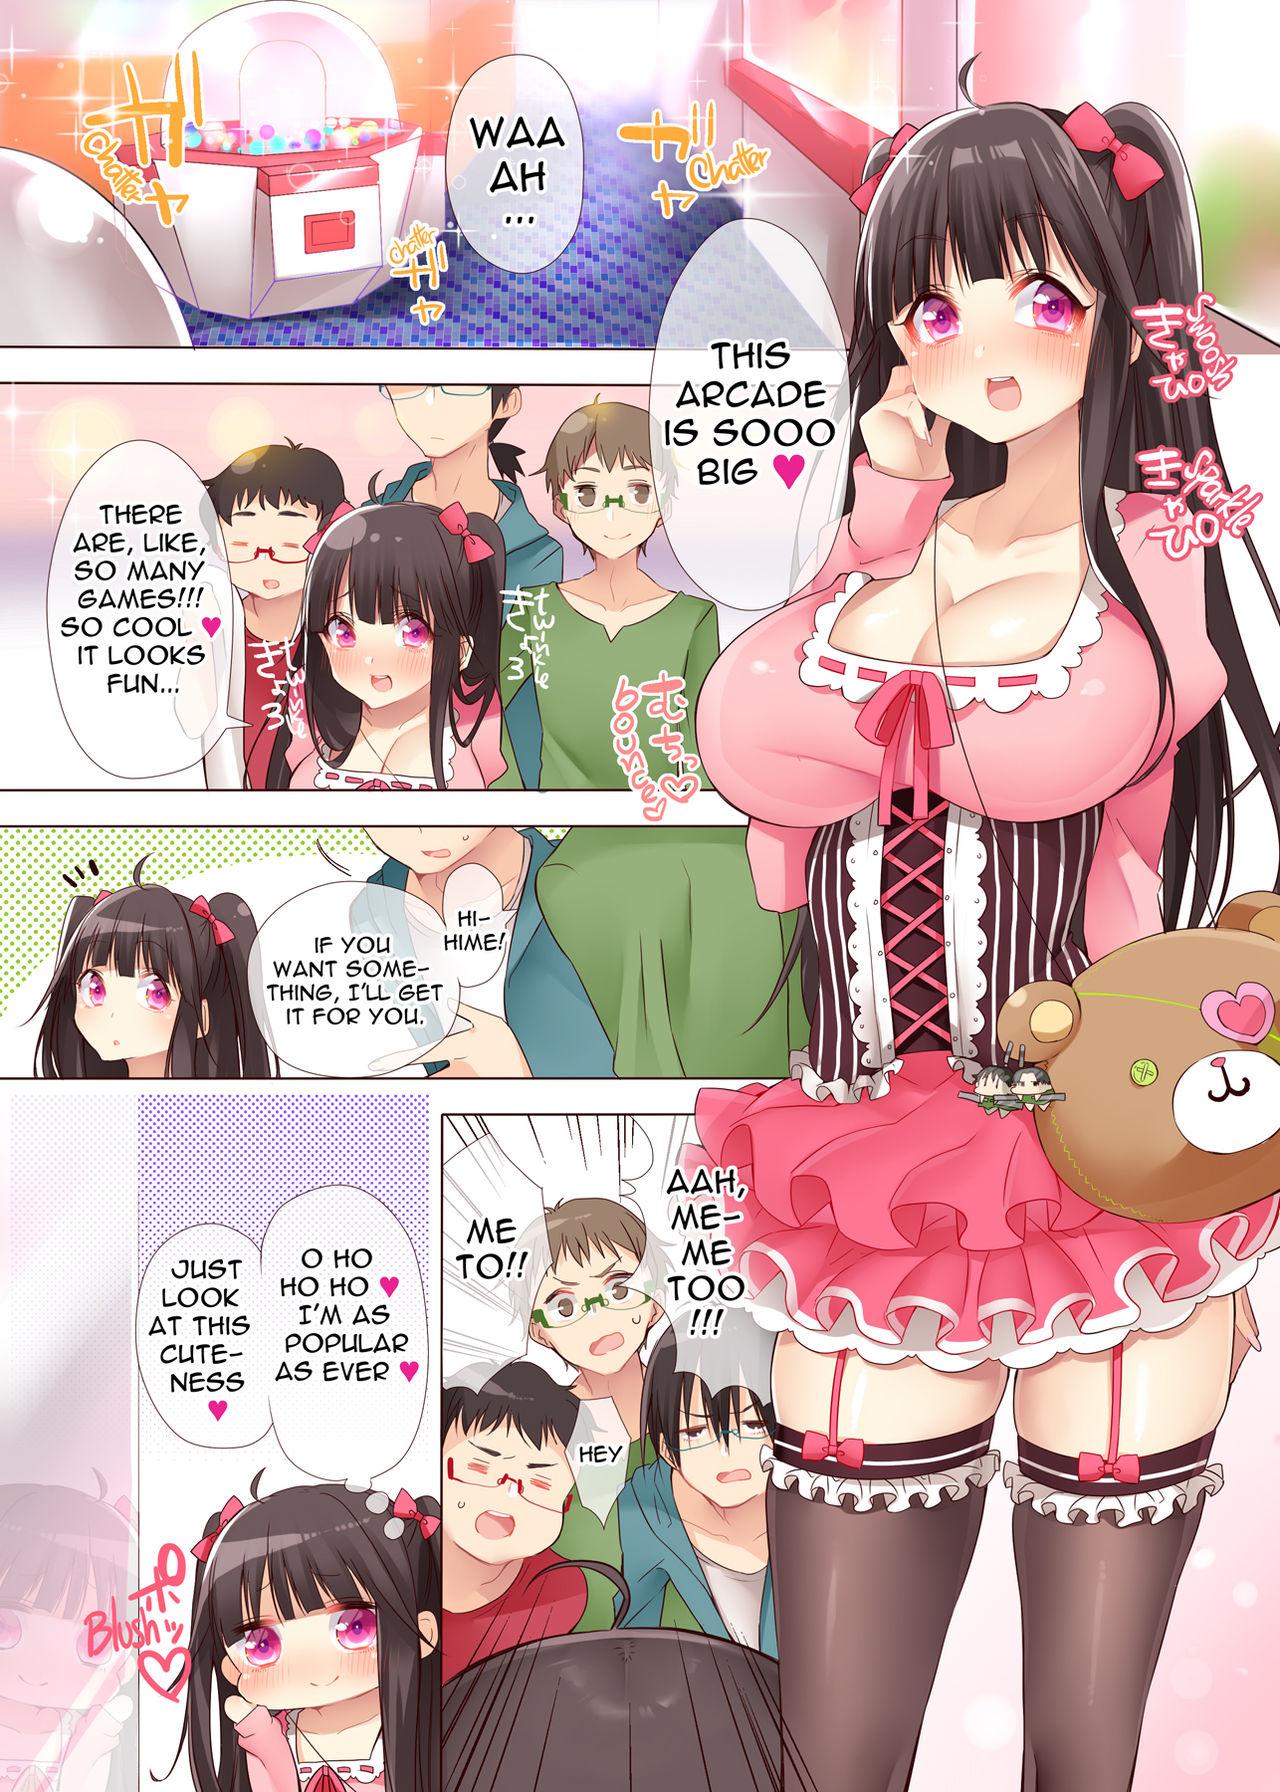 Ametur Porn The Princess of an Otaku Group Got Knocked Up by Some Piece of Trash So She Let an Otaku Guy Do Her Too!? Free Blowjob - Page 2